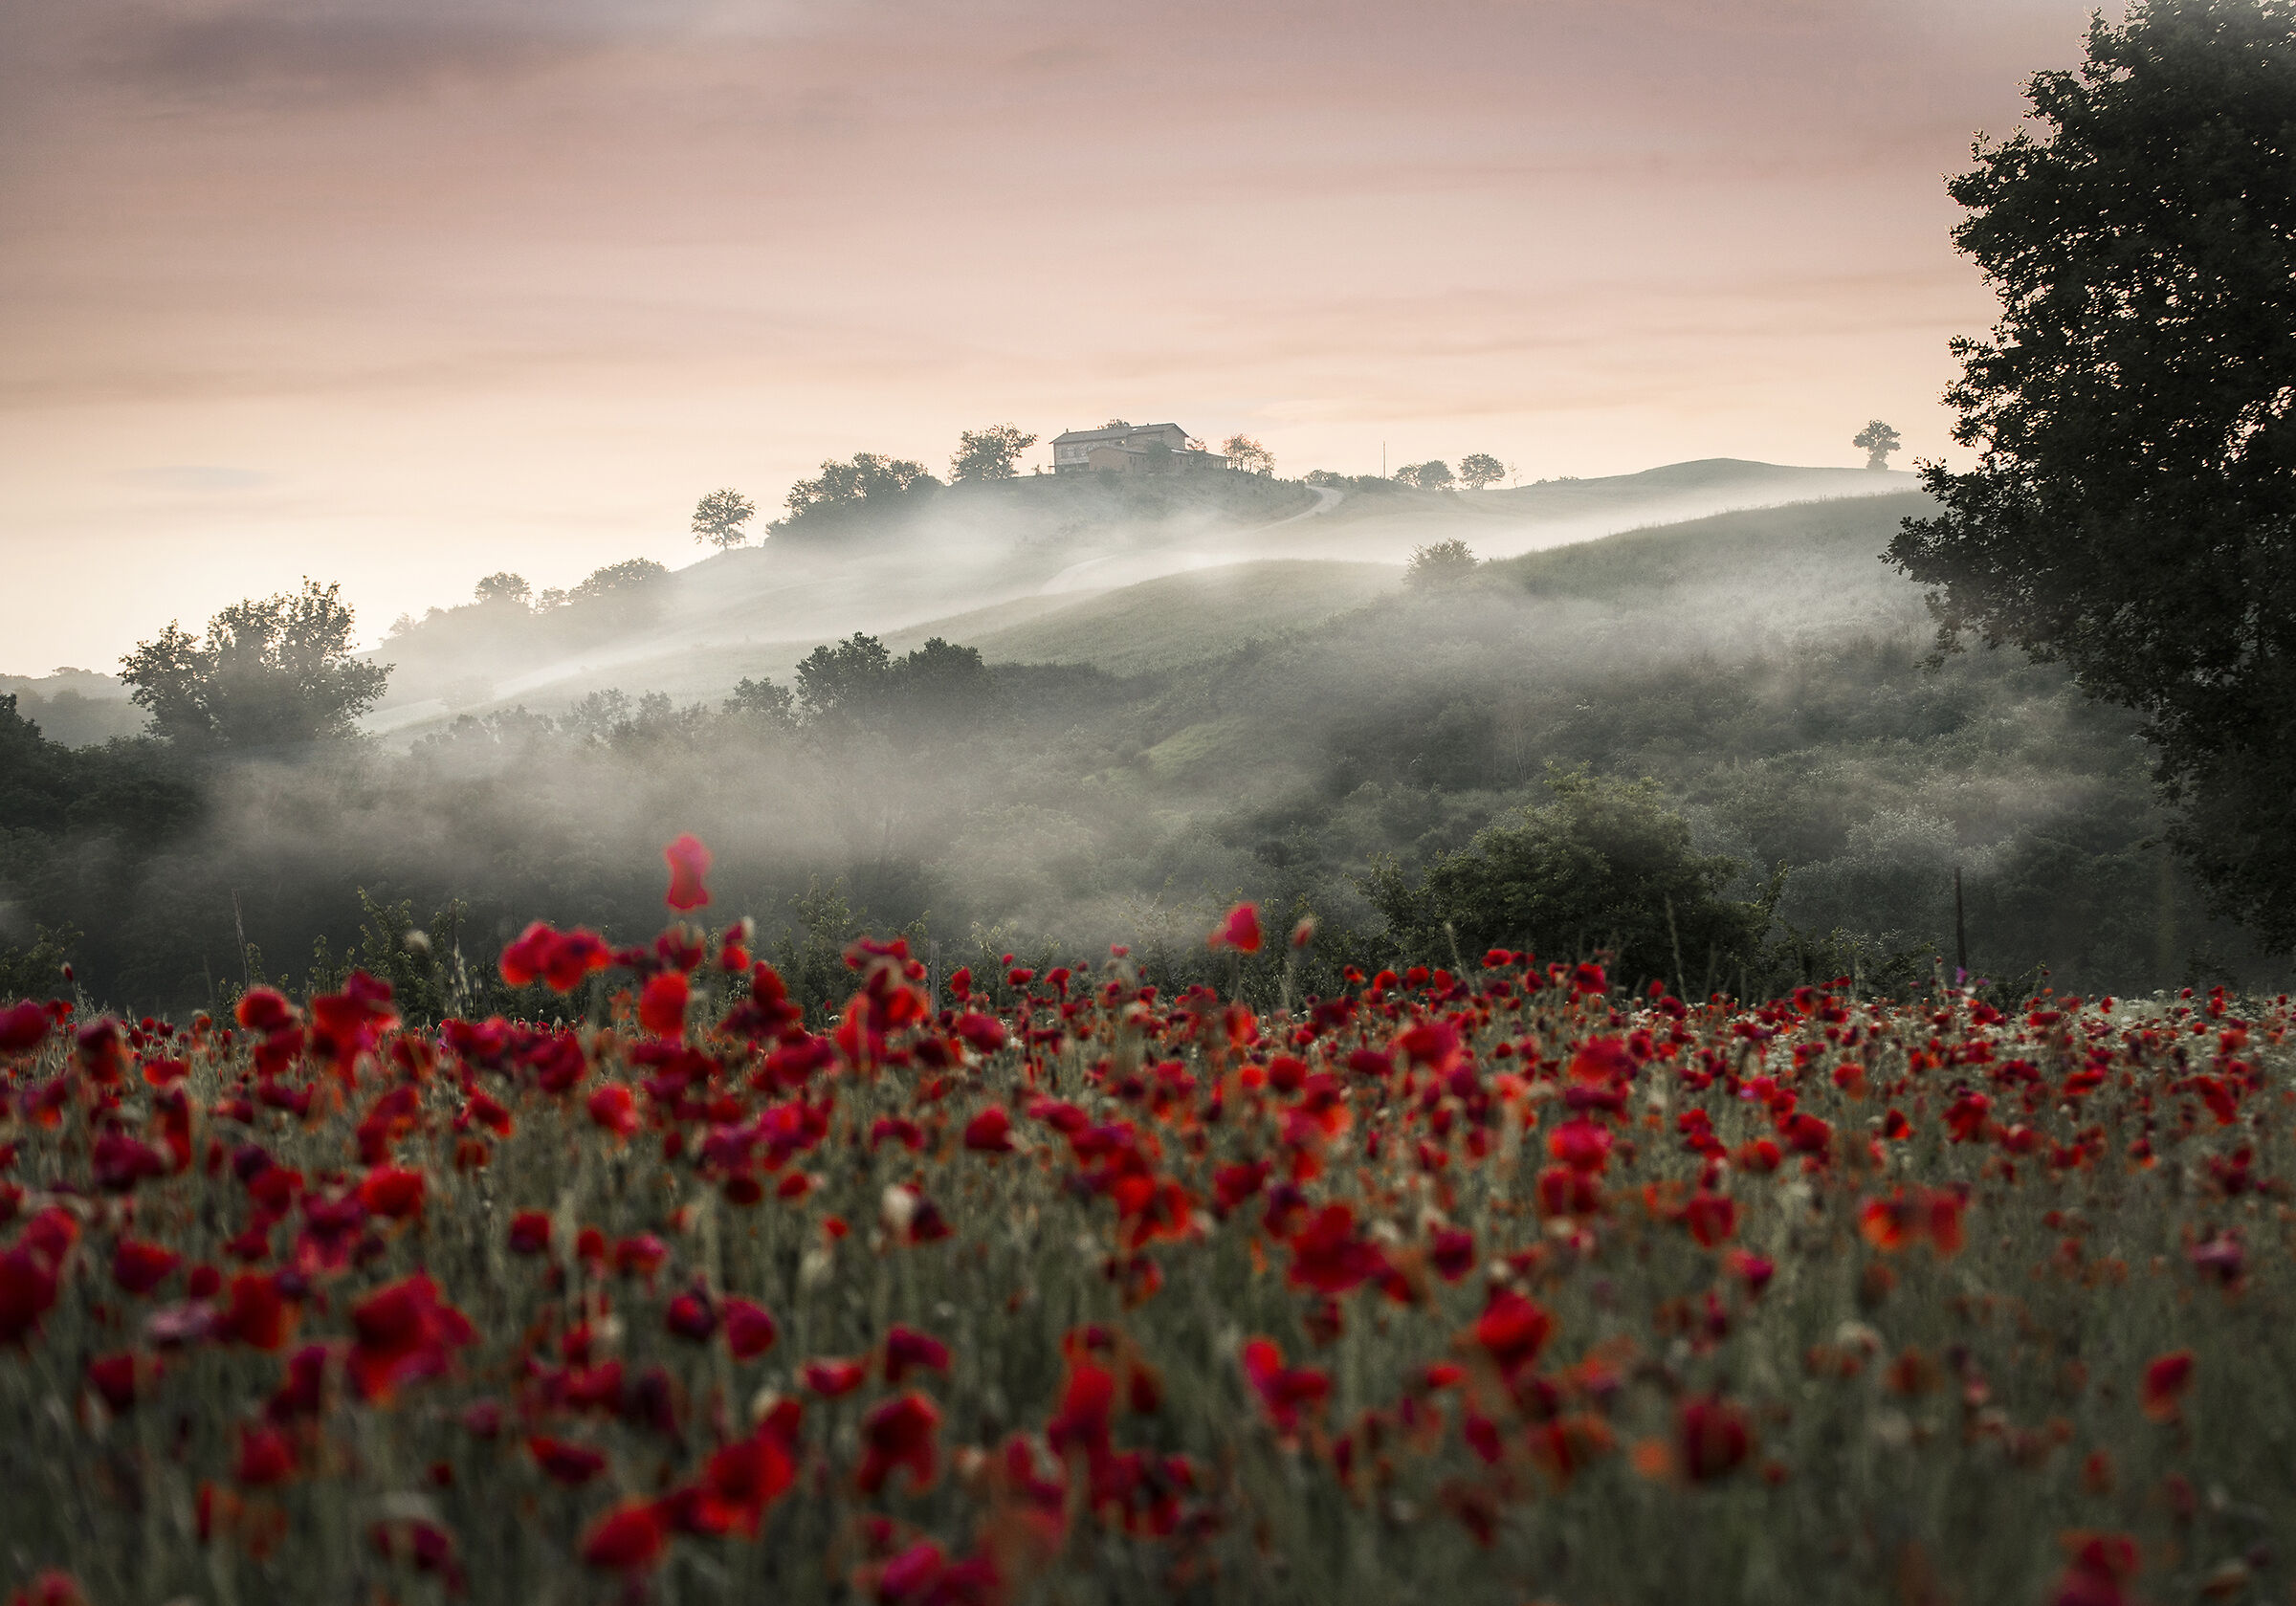 The poppies in the fog...